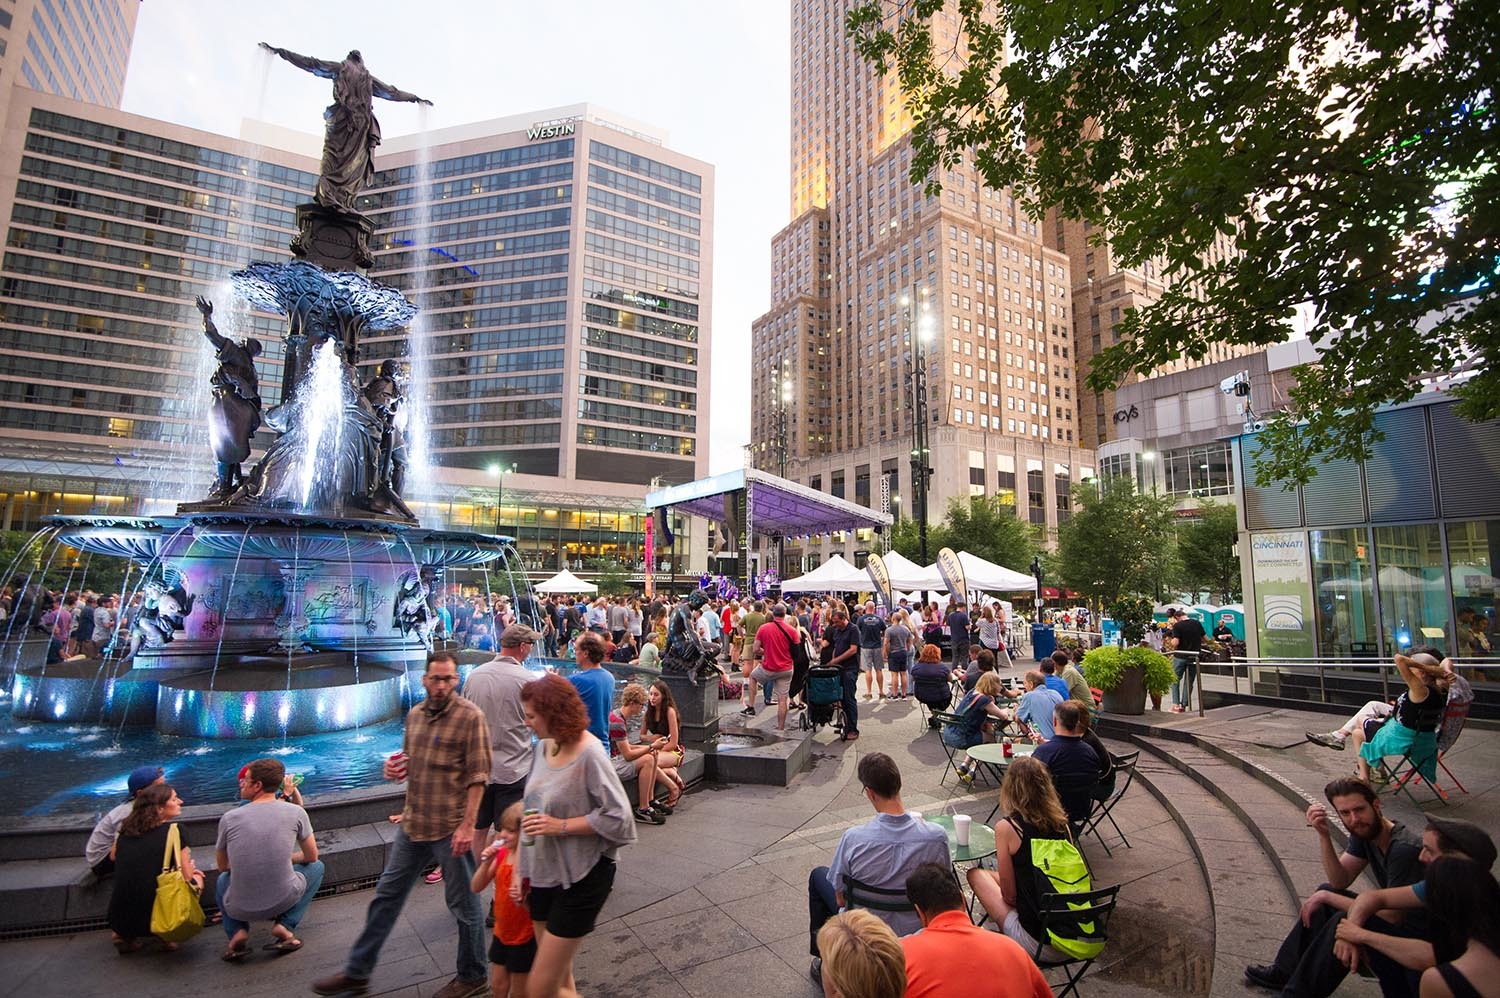 Today, Cincinnati bills Fountain Square as the heart of the city.